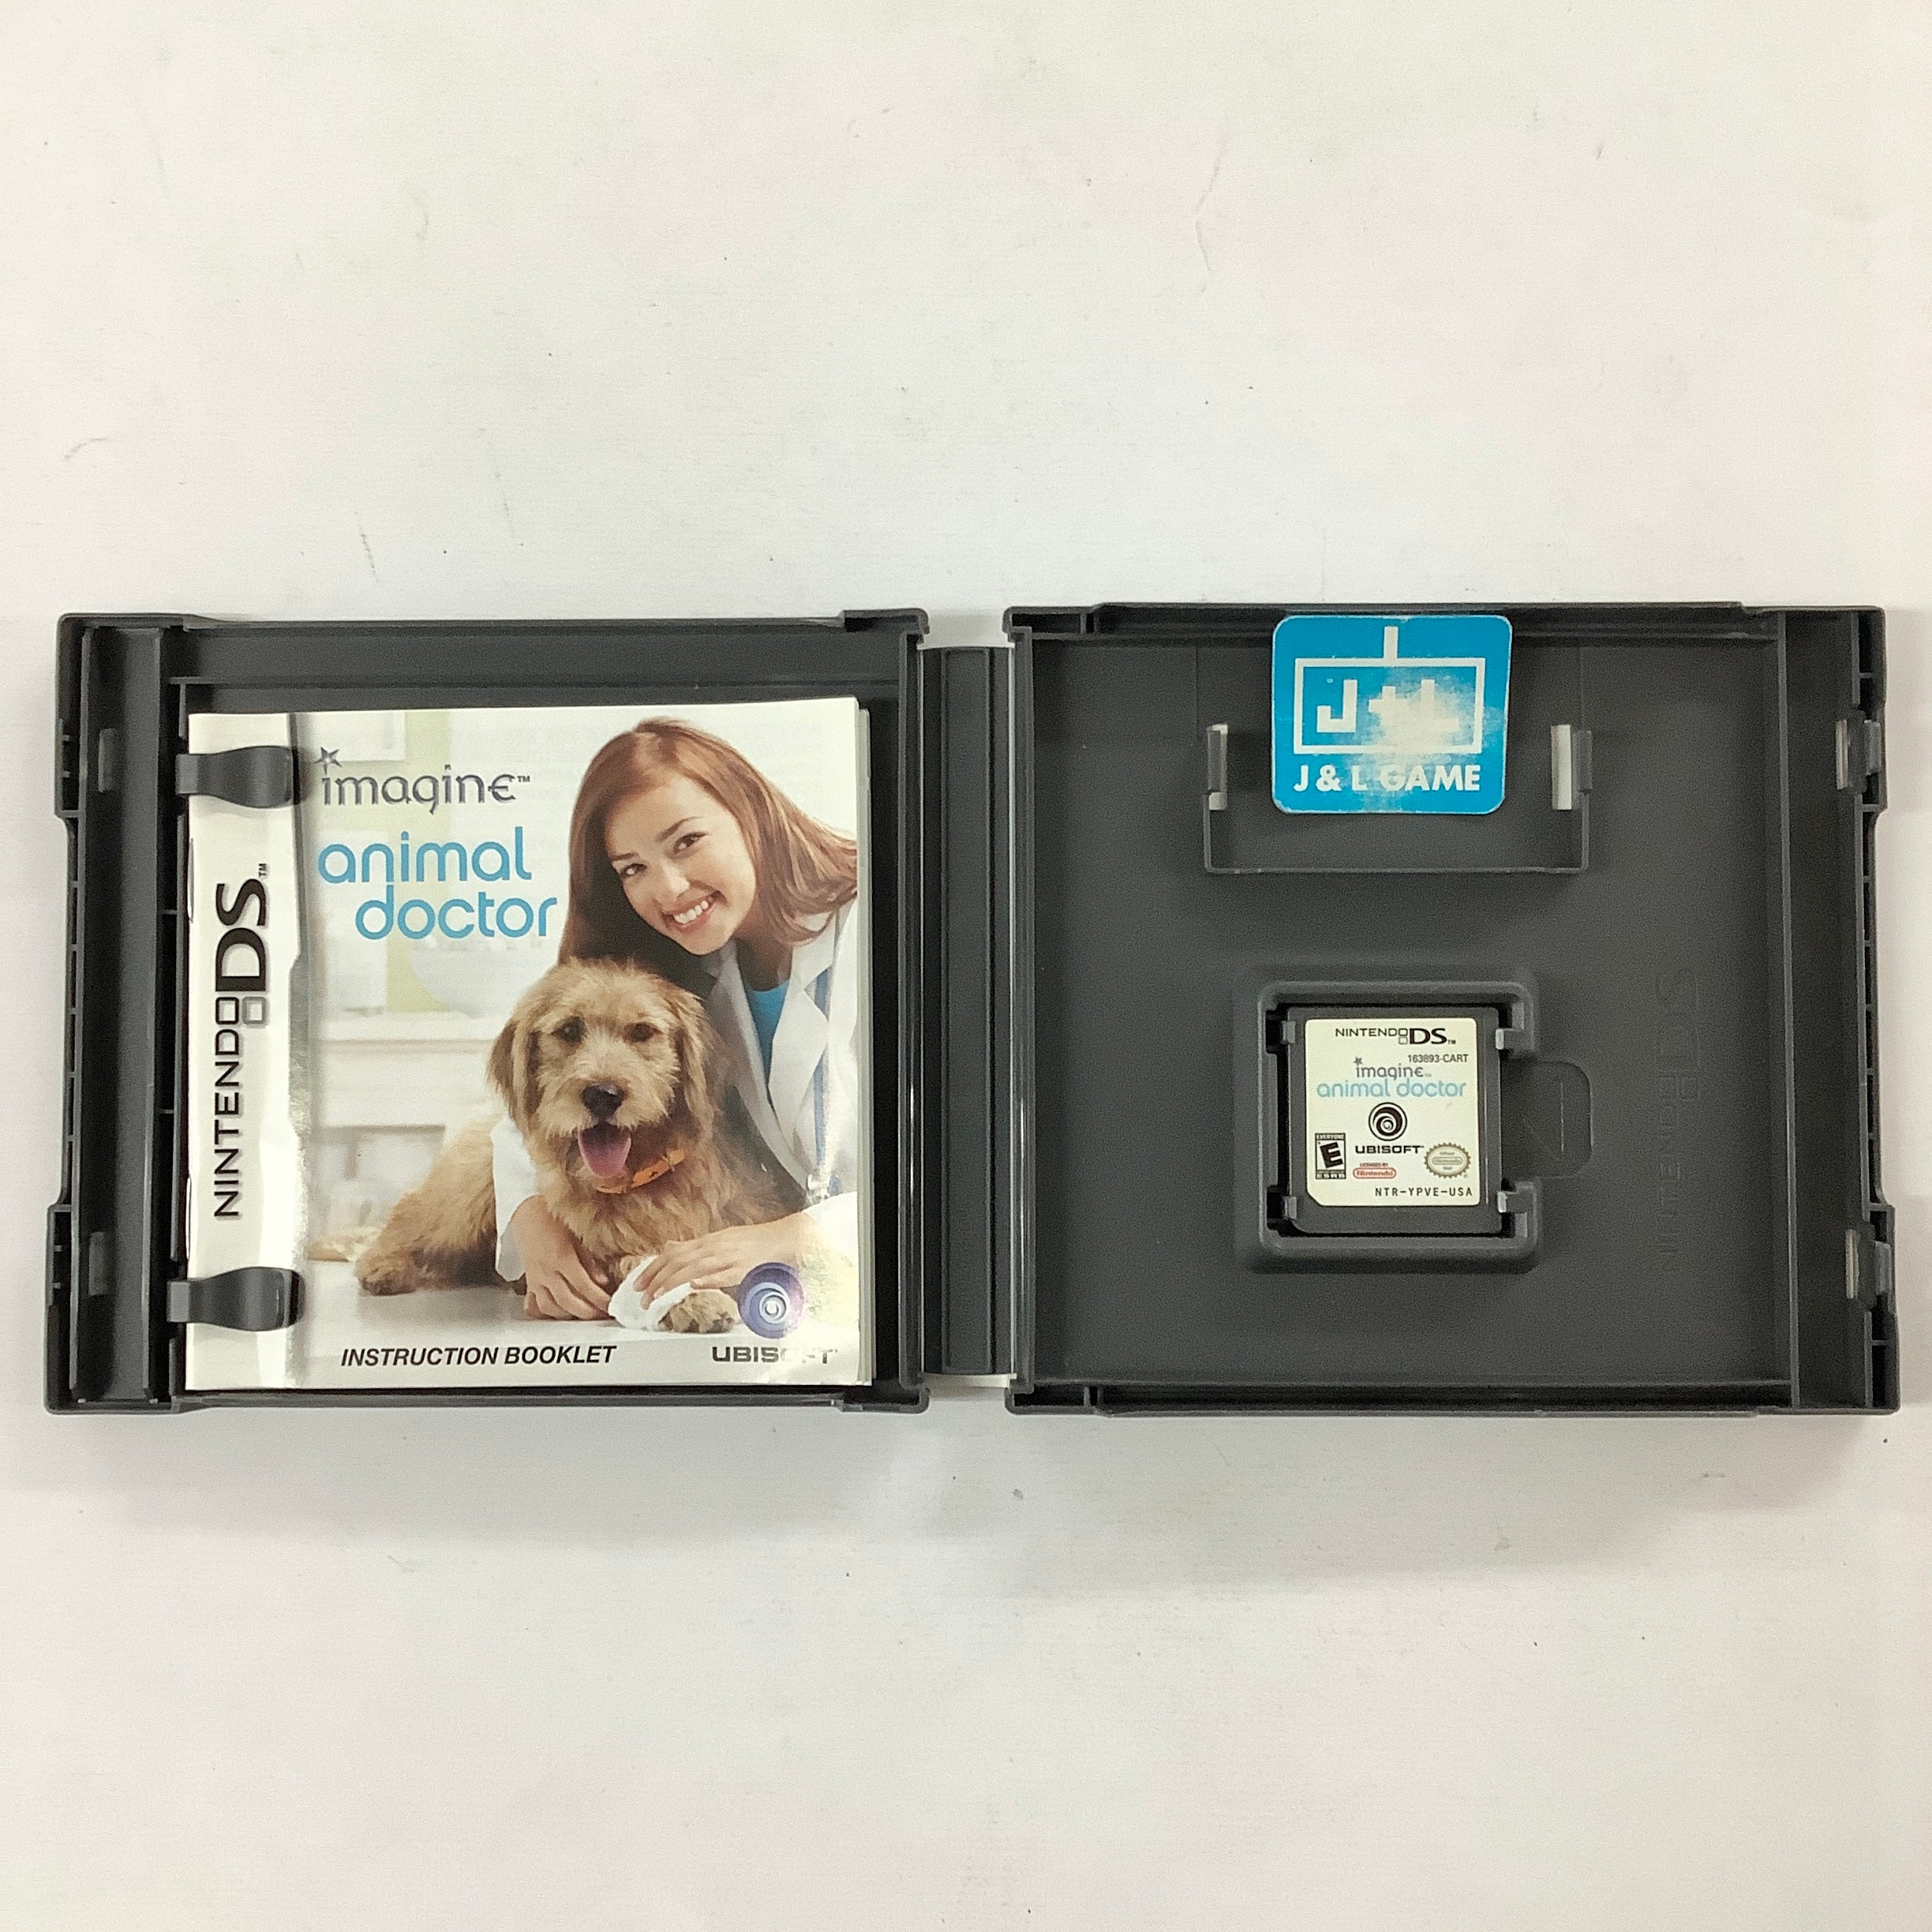 Imagine: Animal Doctor - (NDS) Nintendo DS [Pre-Owned] Video Games Ubisoft   